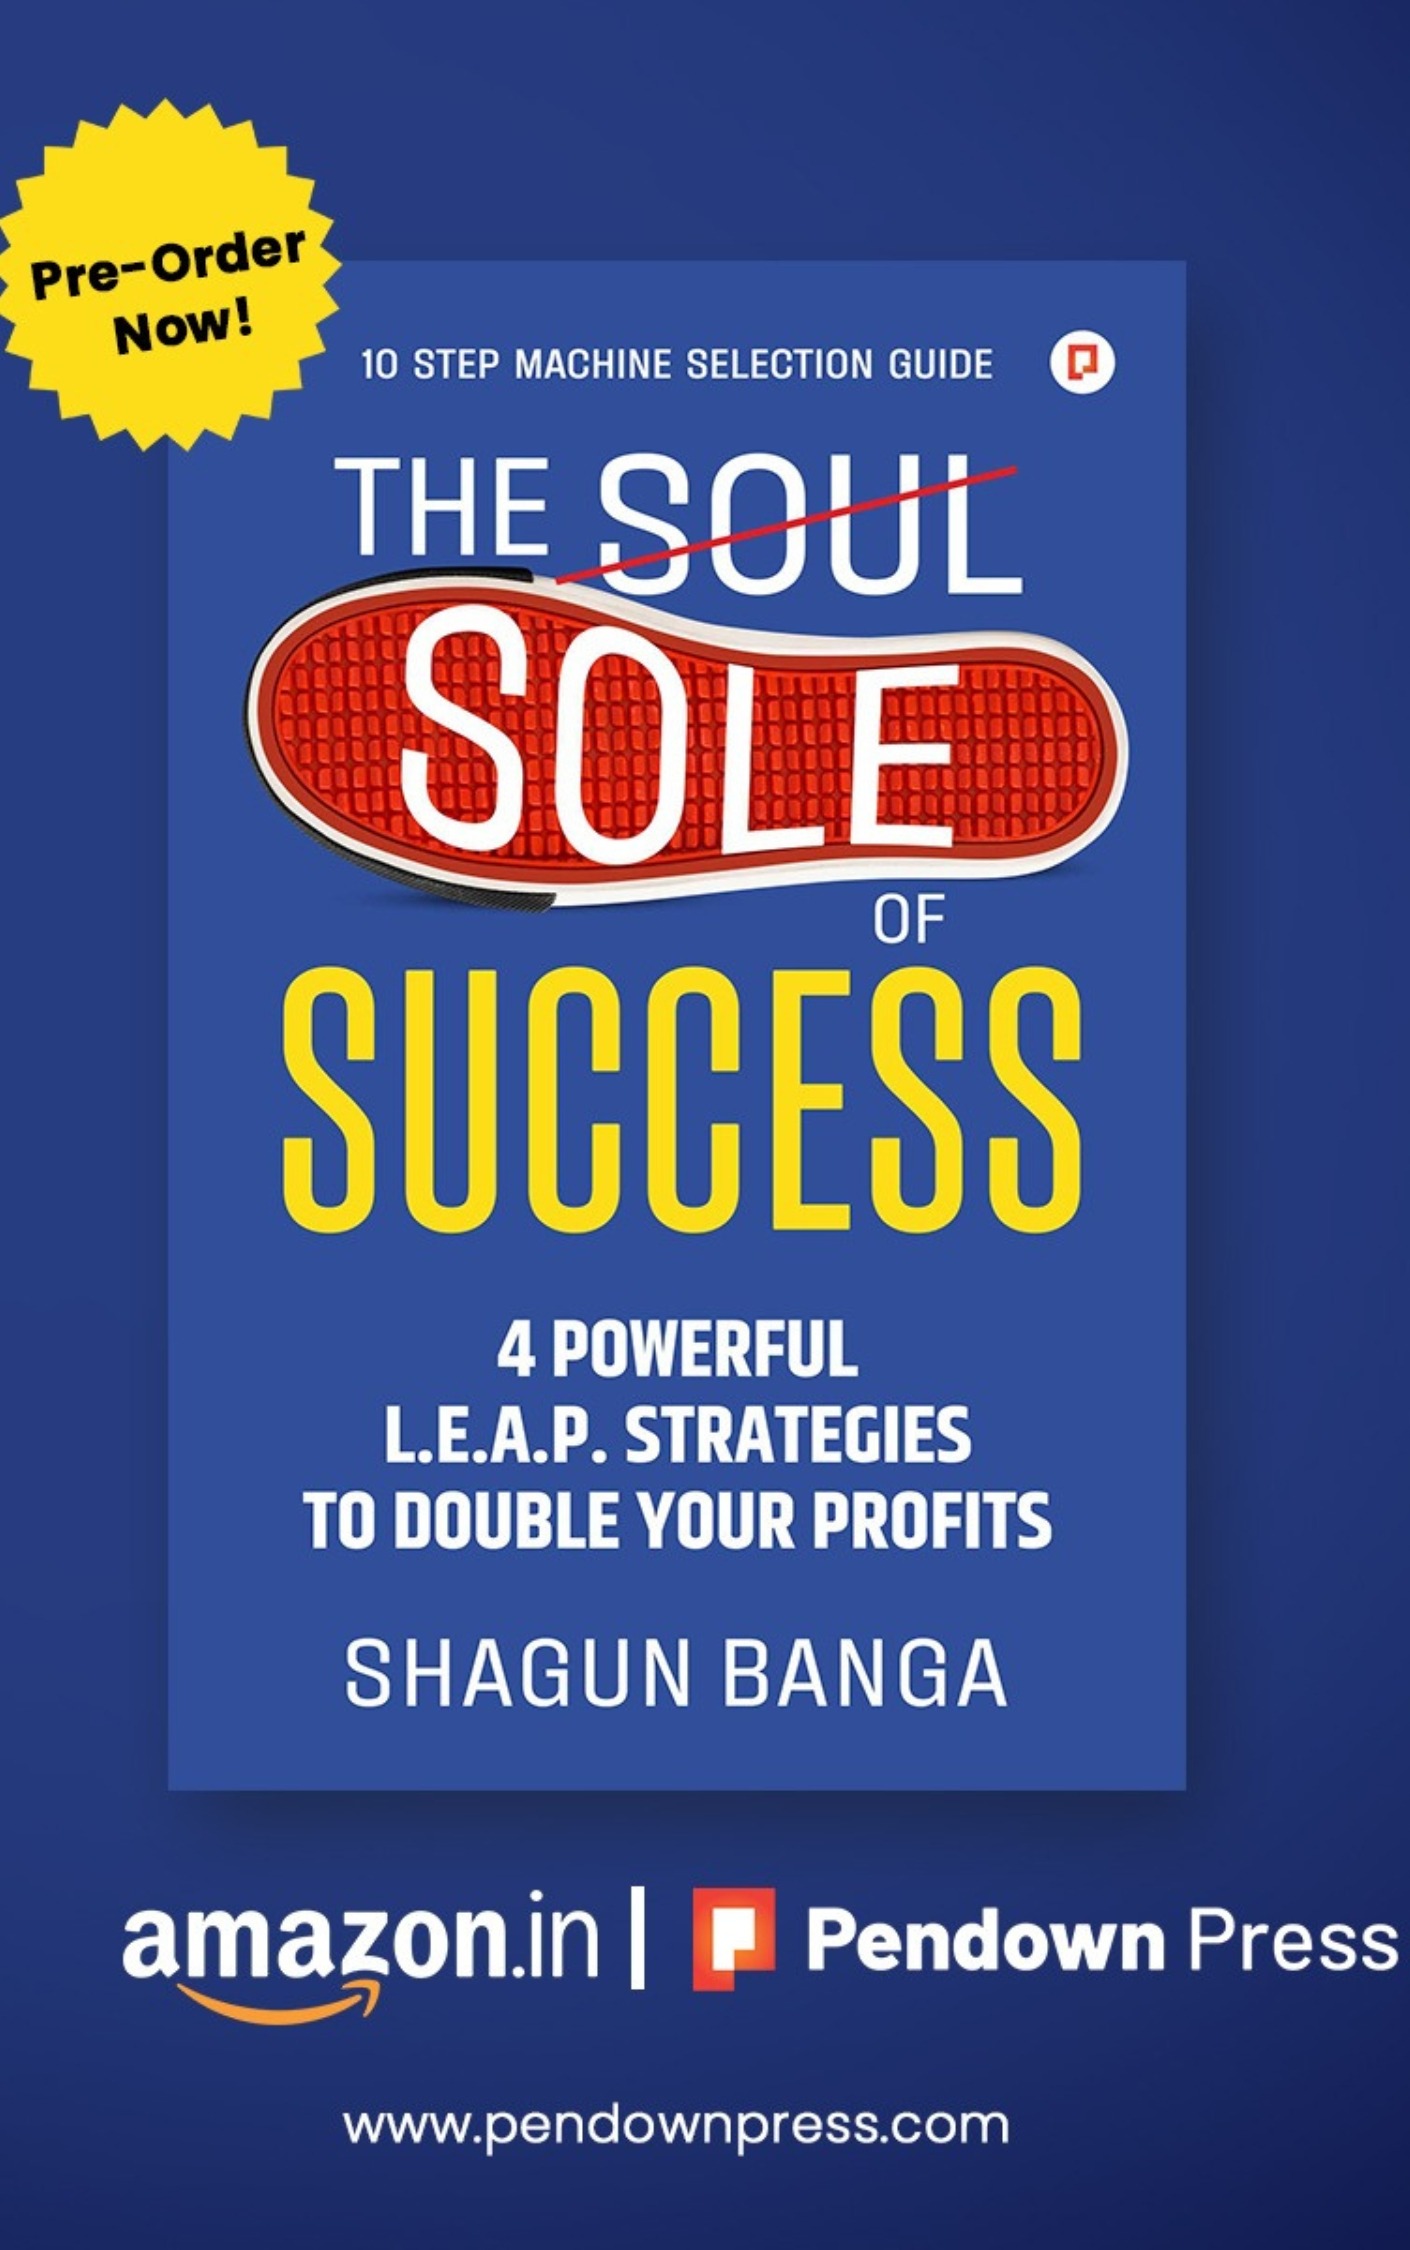 Cover image of 'The Sole of Success' eBook, featuring a stylized illustration representing achievement and accomplishment in the footwear industry.